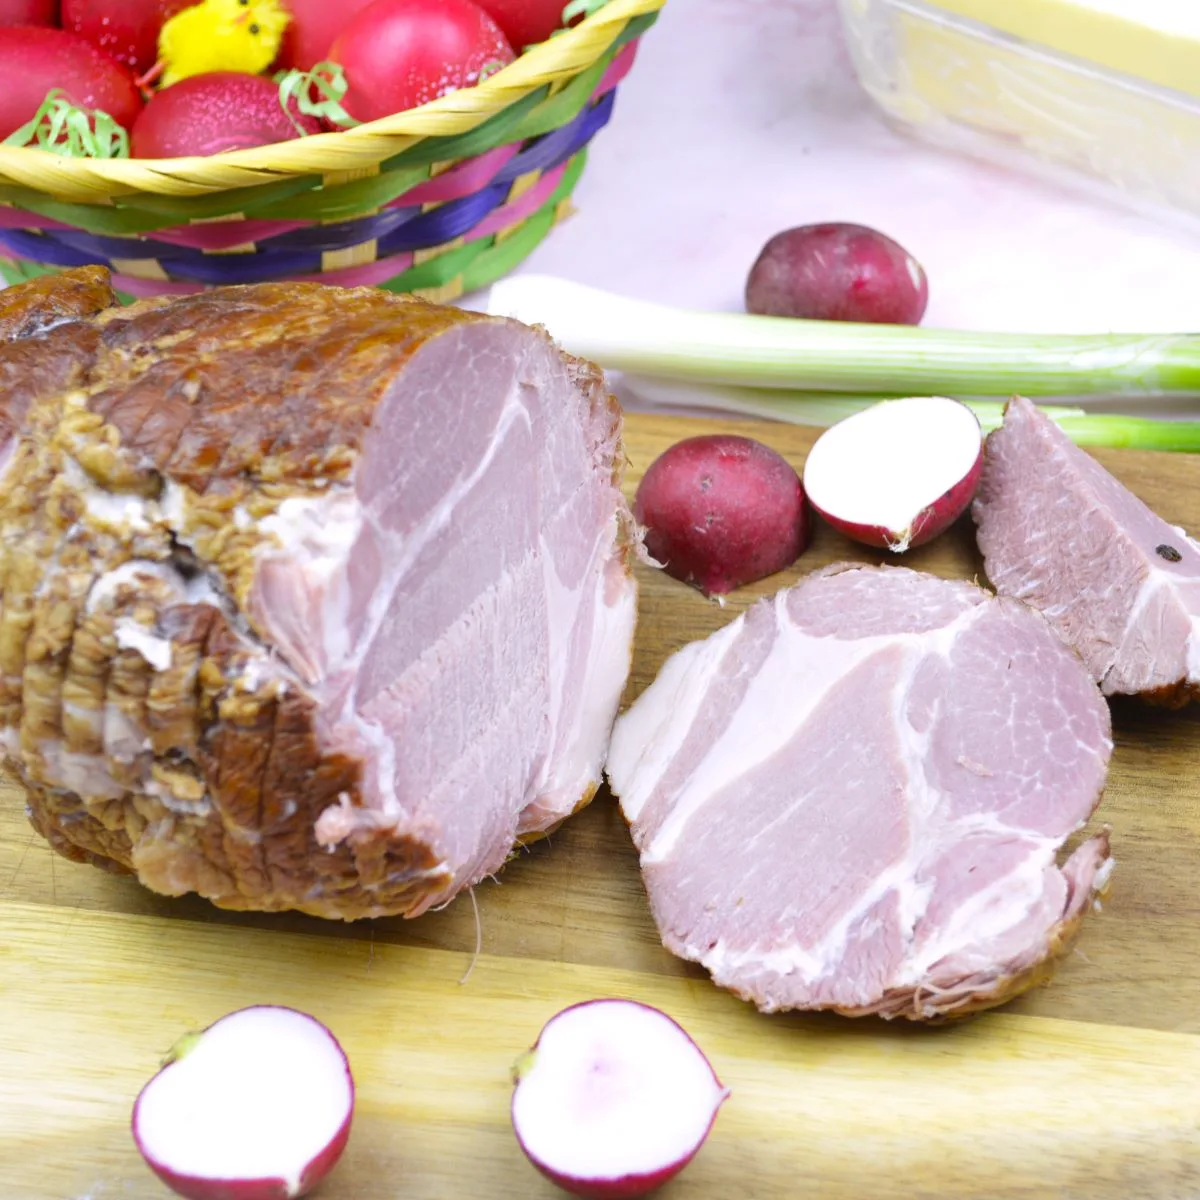 Best Easter Ham Recipe-Sliced Ham Served on Chopping Board With Radish and Spring Onions